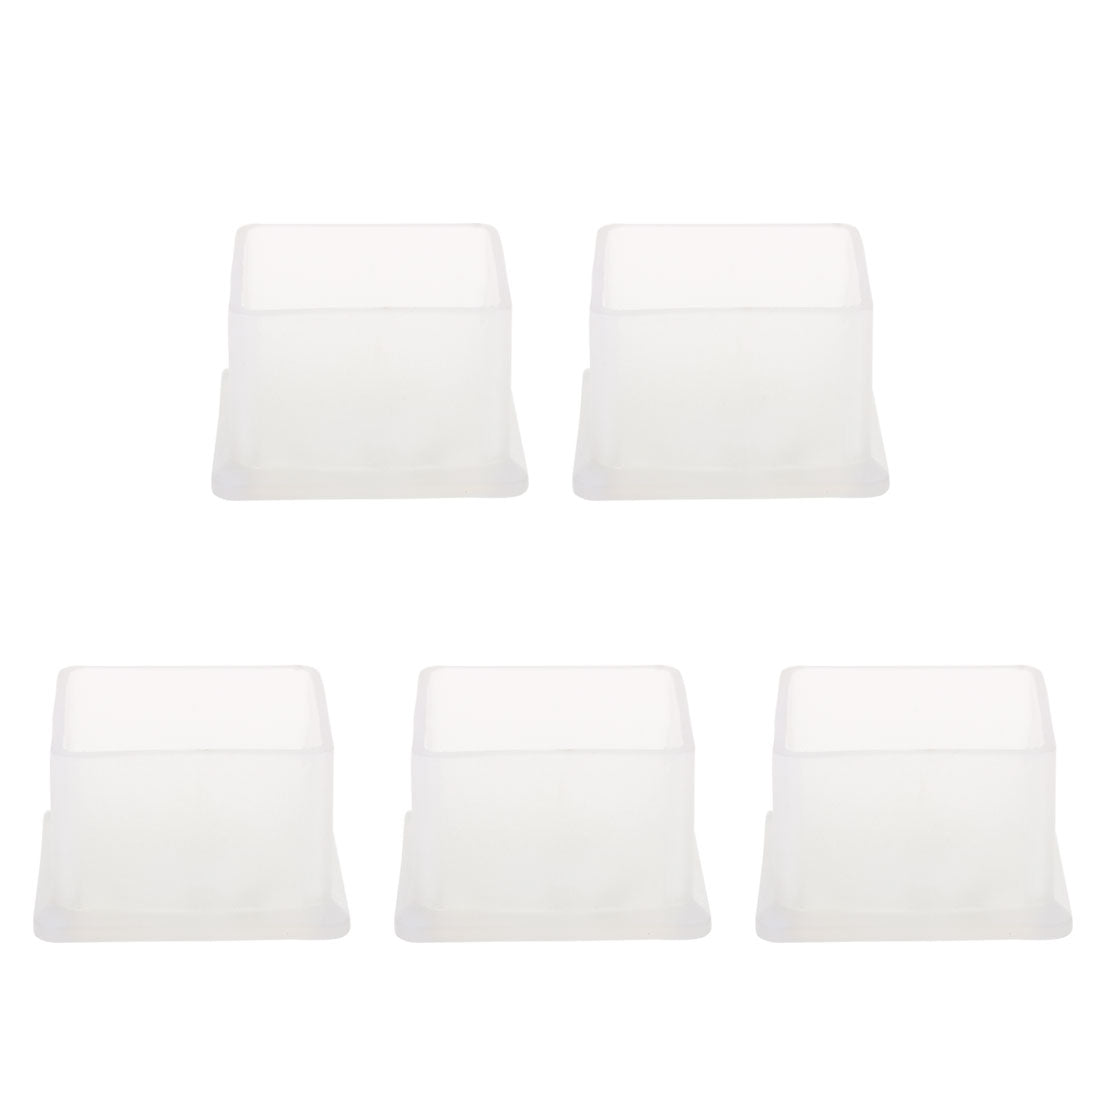 uxcell Uxcell Clear PVC Chair Leg Caps End Tip Feet Cover Furniture Glide Floor Protector 5pcs Reduce Noise Prevent Scratch